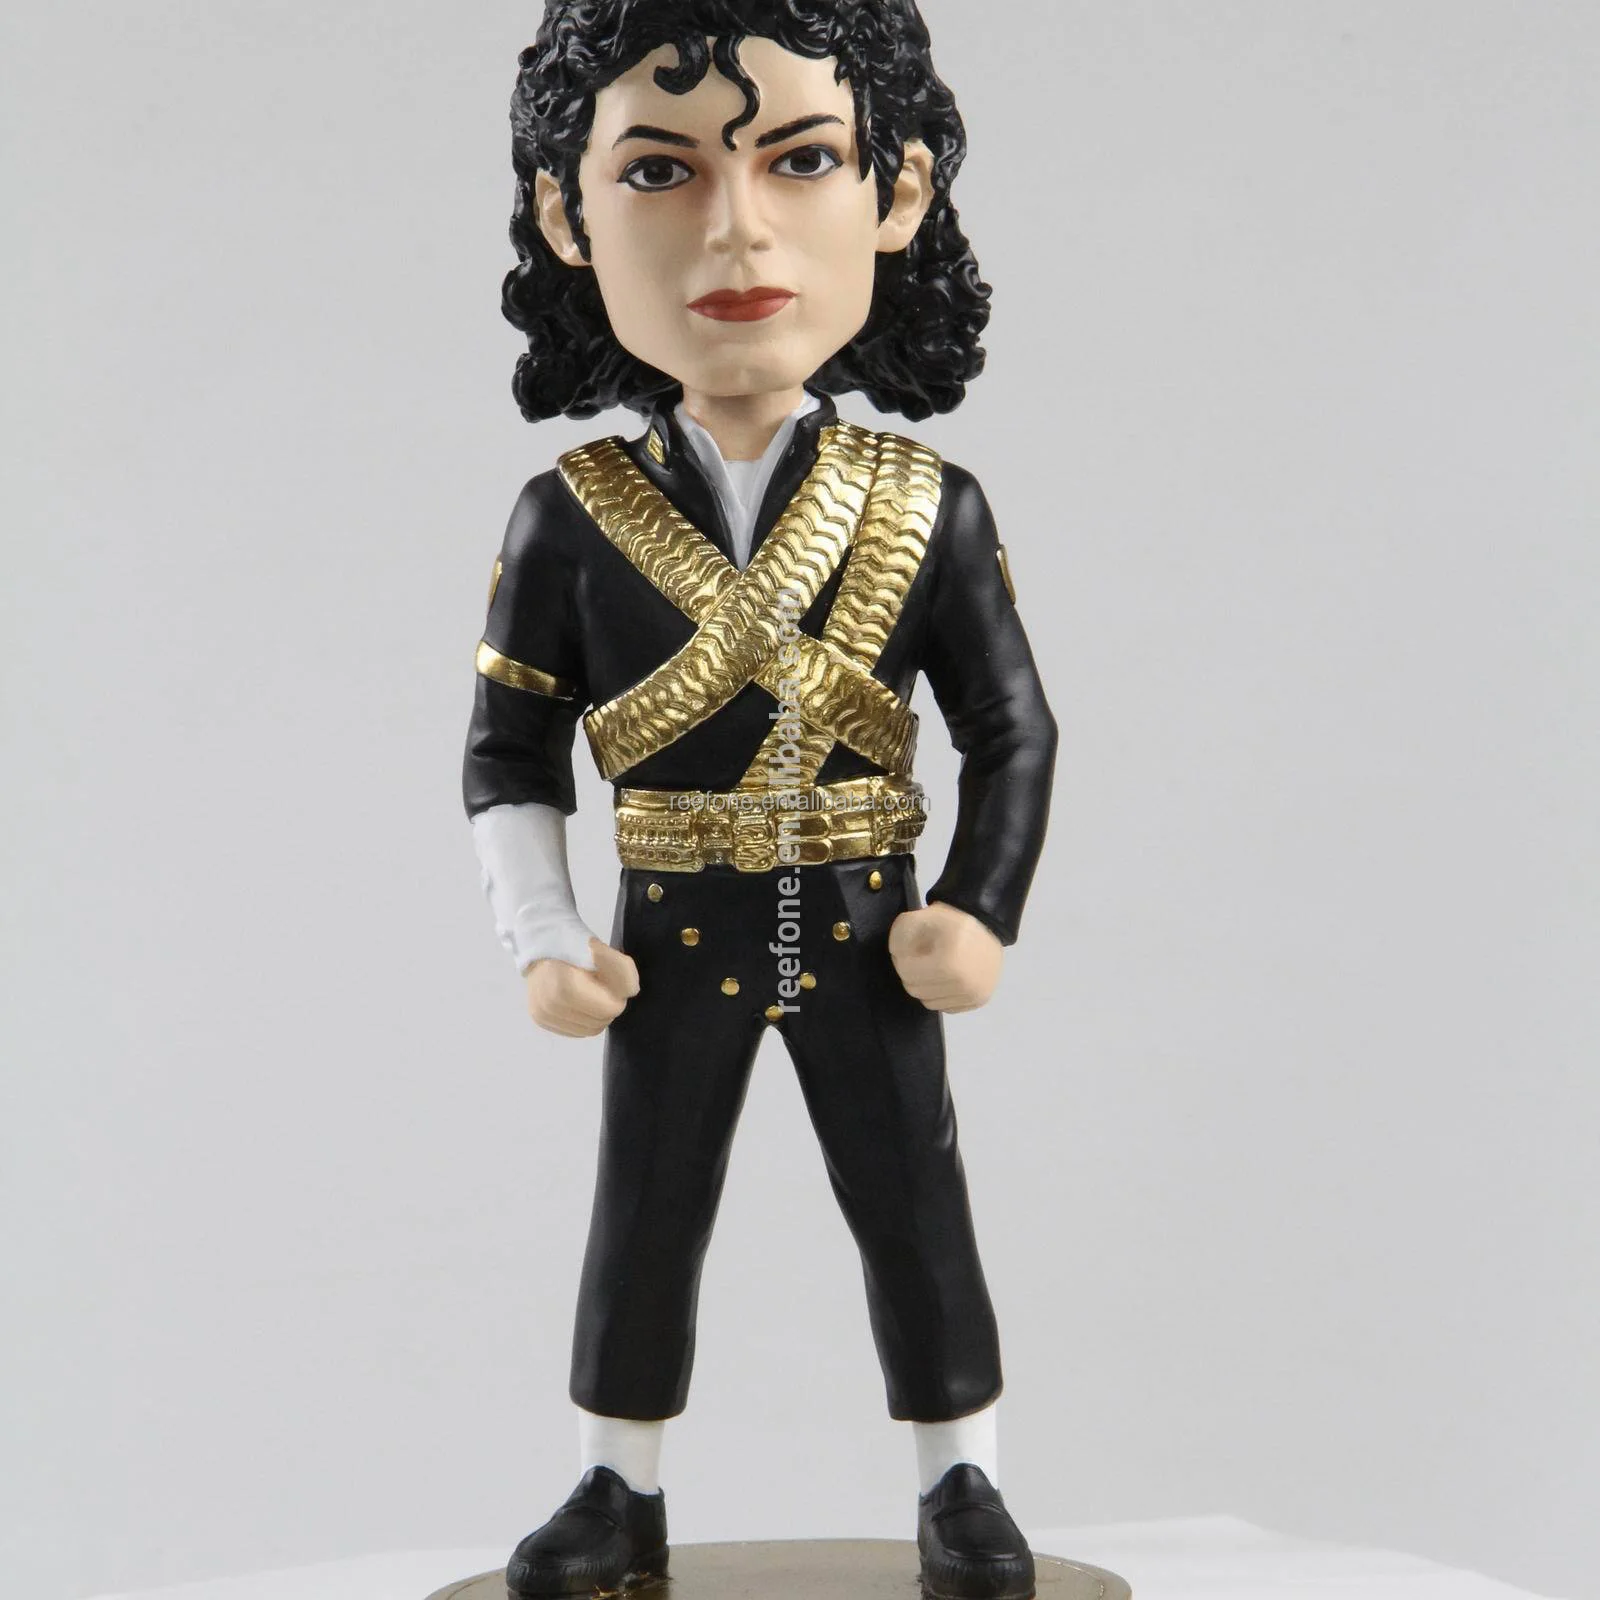 Source famous Movie Character MJ resin dancing statue doll singer 